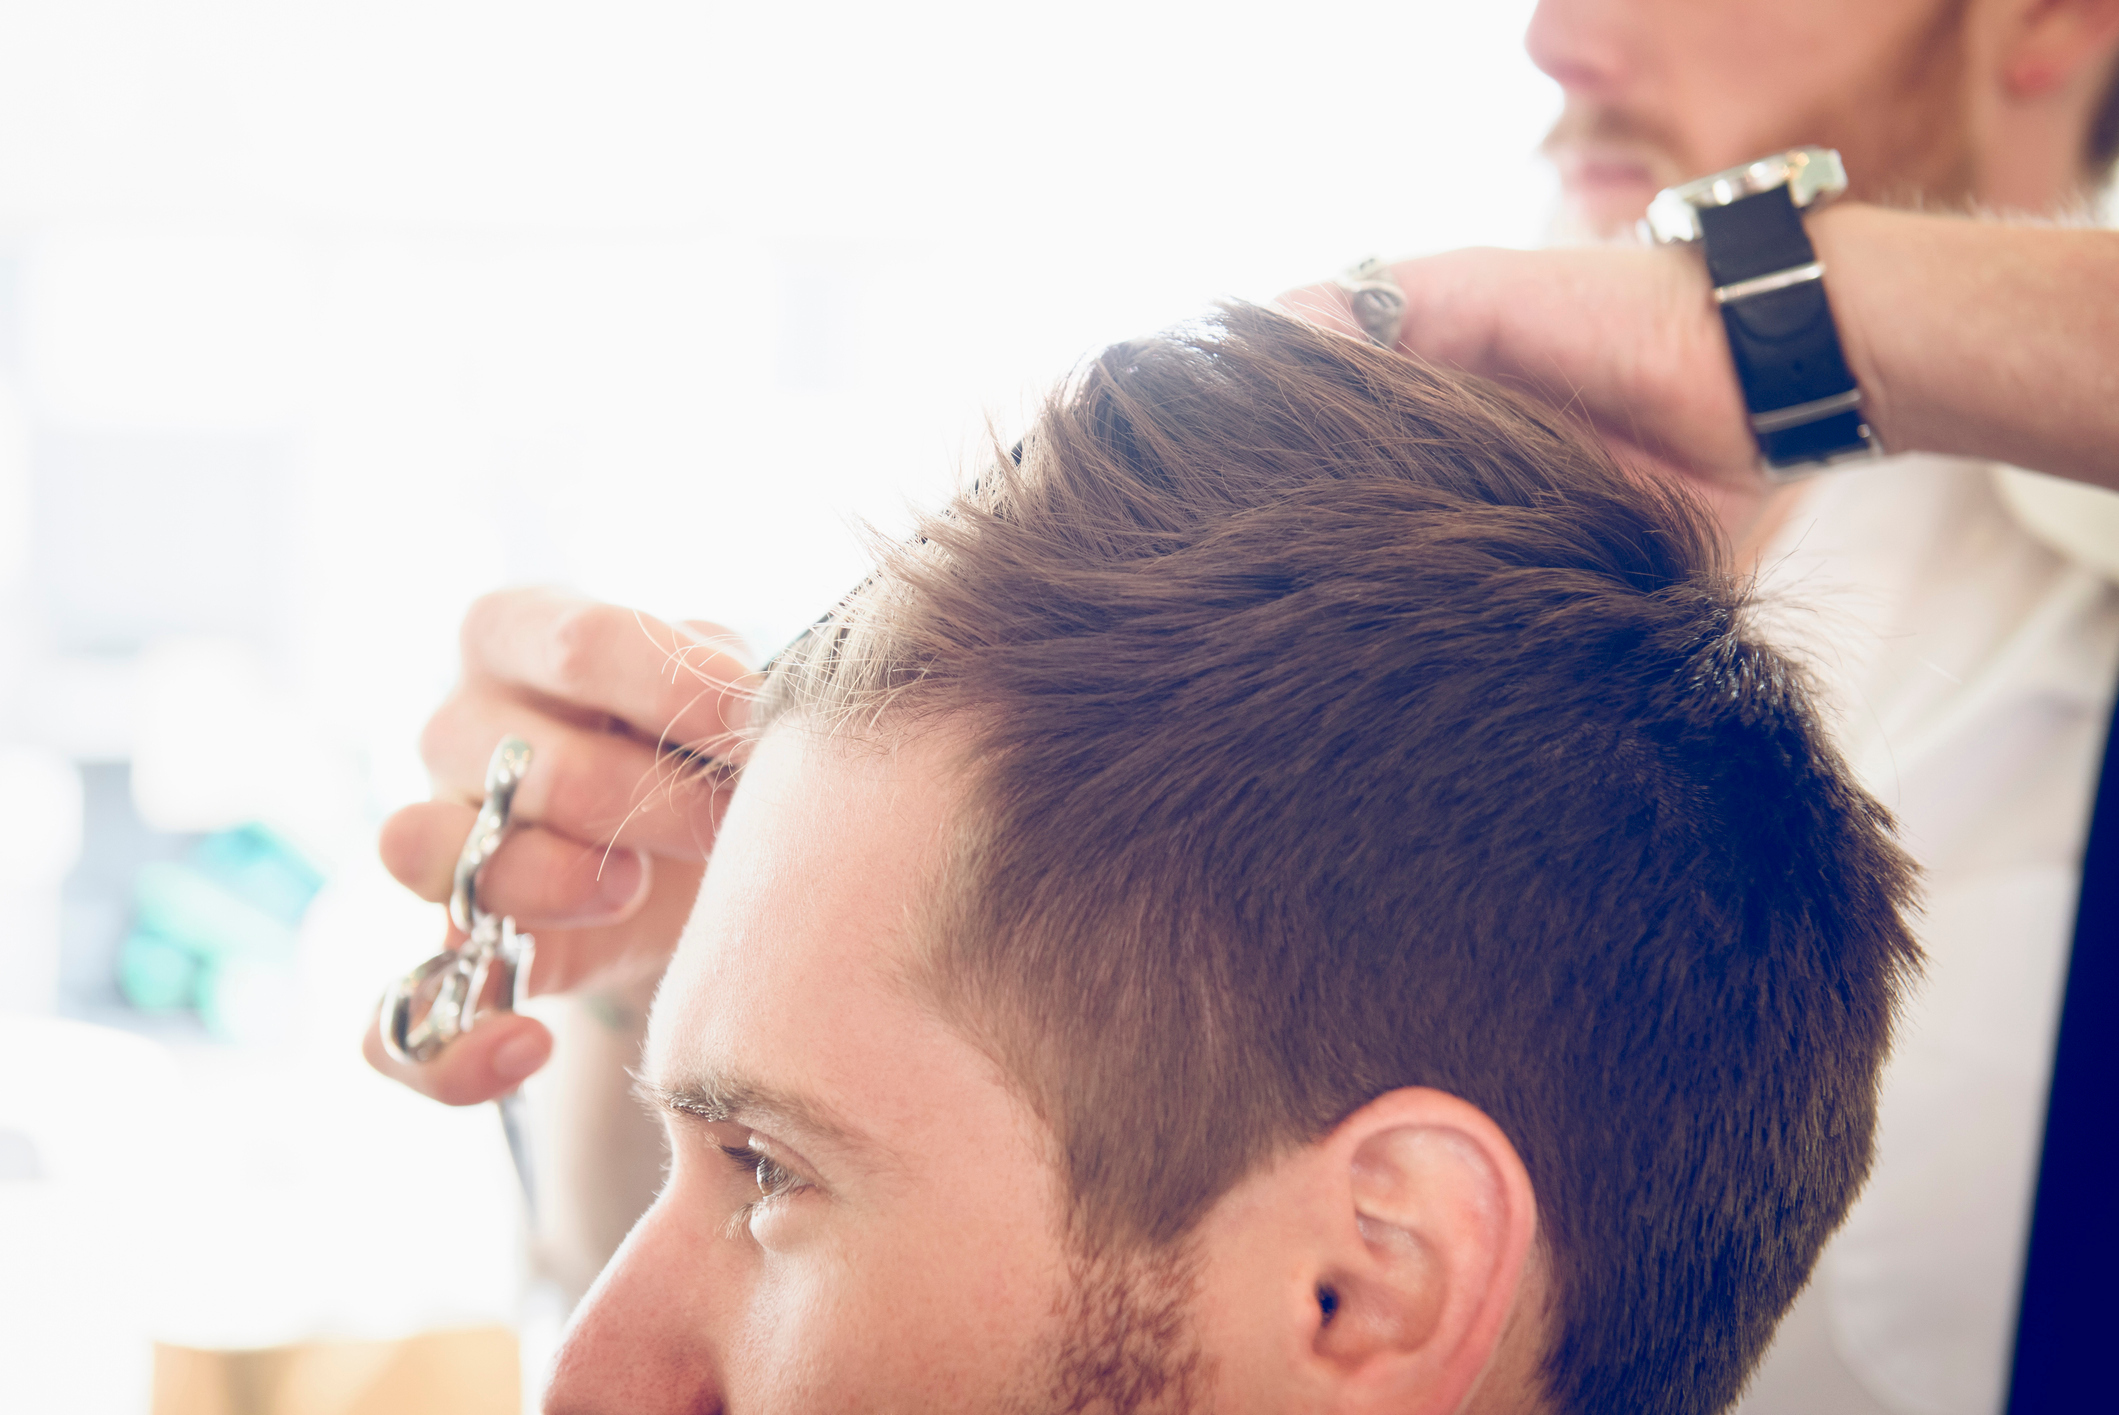 Post Iso Grooming Trends for Aussie Blokes to Experiment With